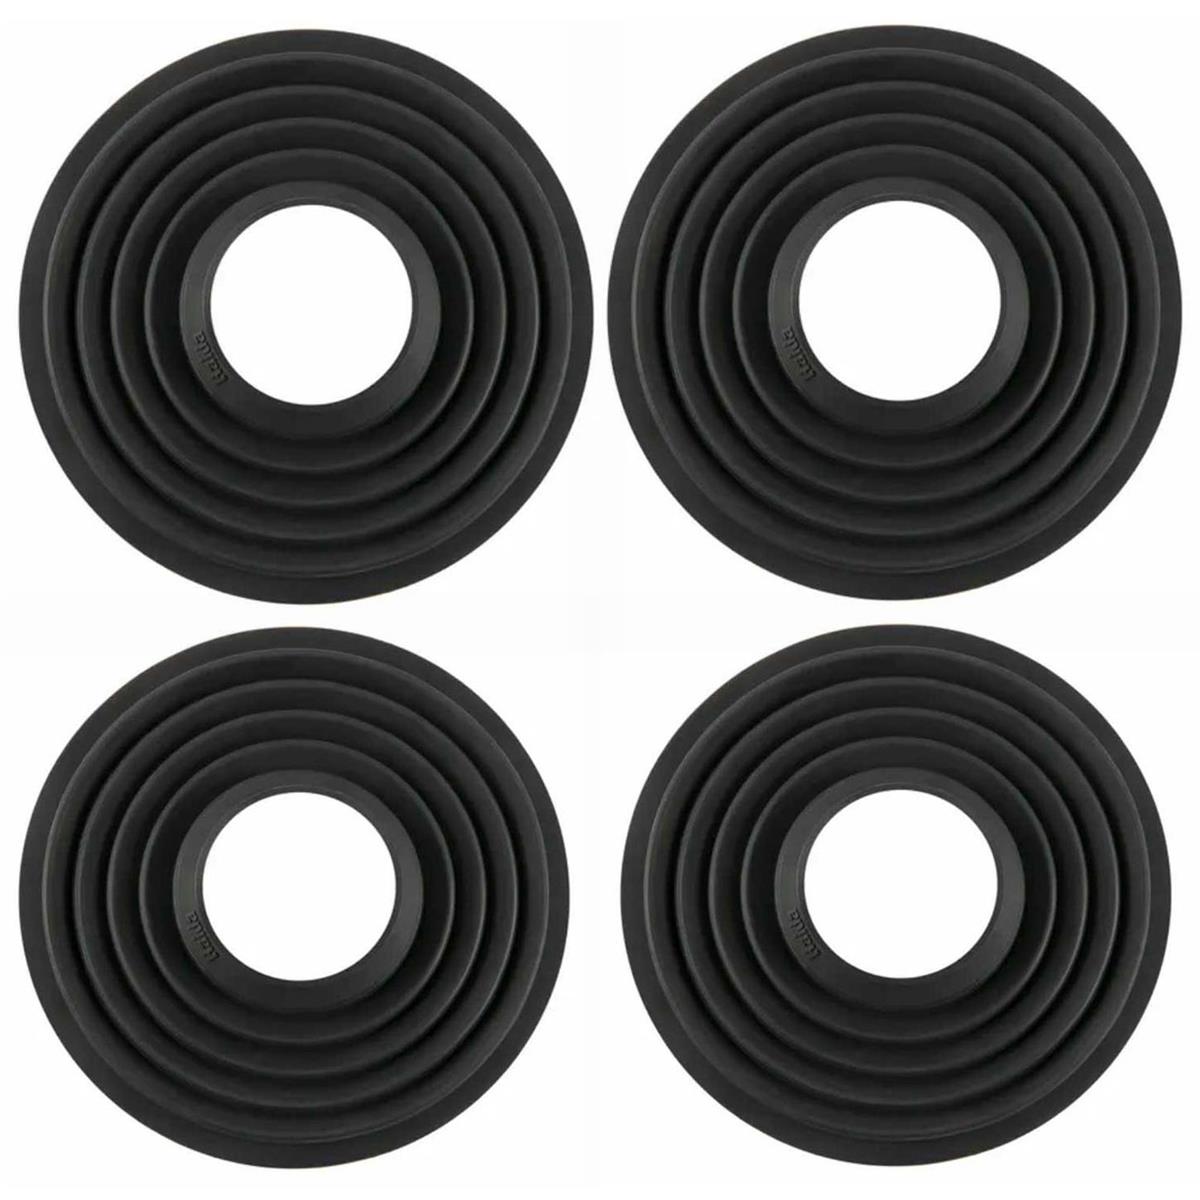 Image of Haida Silicone Hoods for 50-70mm Lenses (2-Pack) and for 70-90mm Lenses (2-Pack)